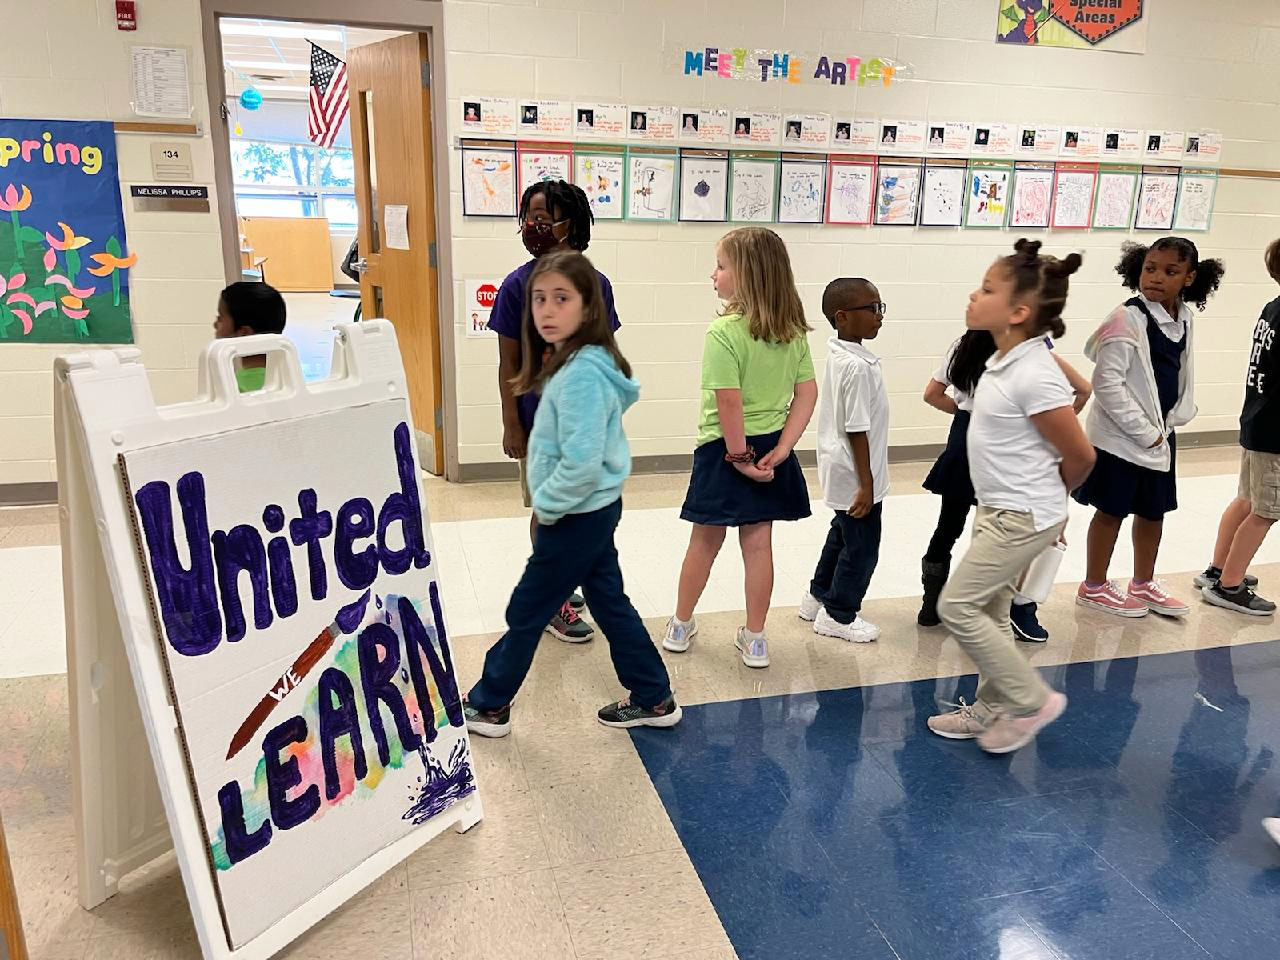 Students walking in a hallway past a sign that reads: "United We Learn"